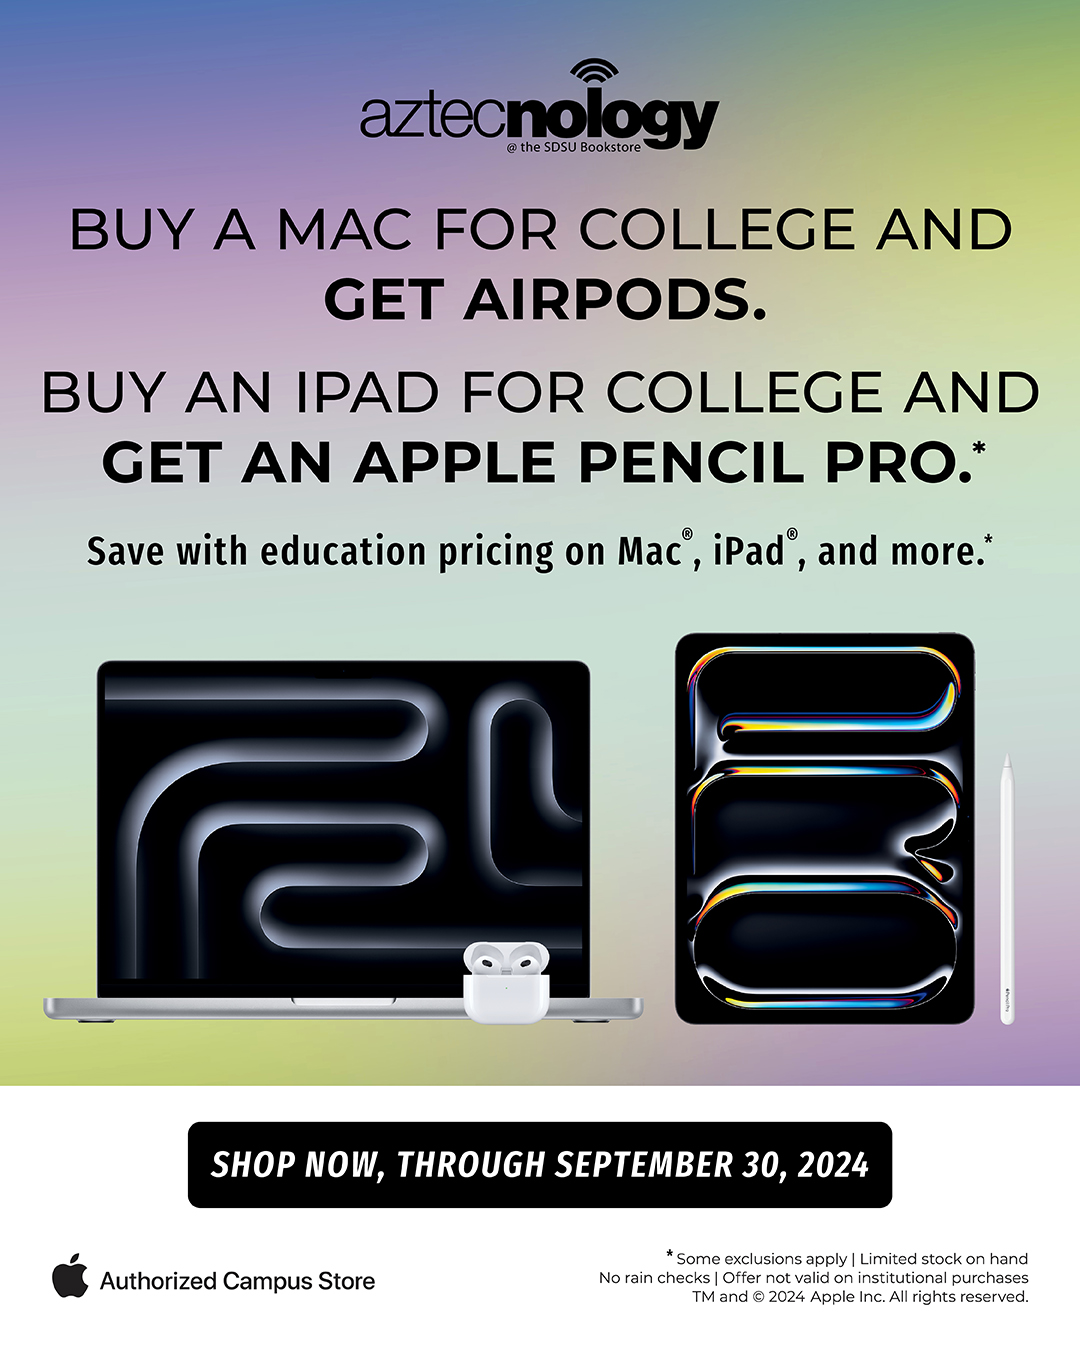 Buy a mac for college and get airpods. Buy an iPad for college and get an Apple pencil pro. Save with education pricing on Mac, iPad, and more.